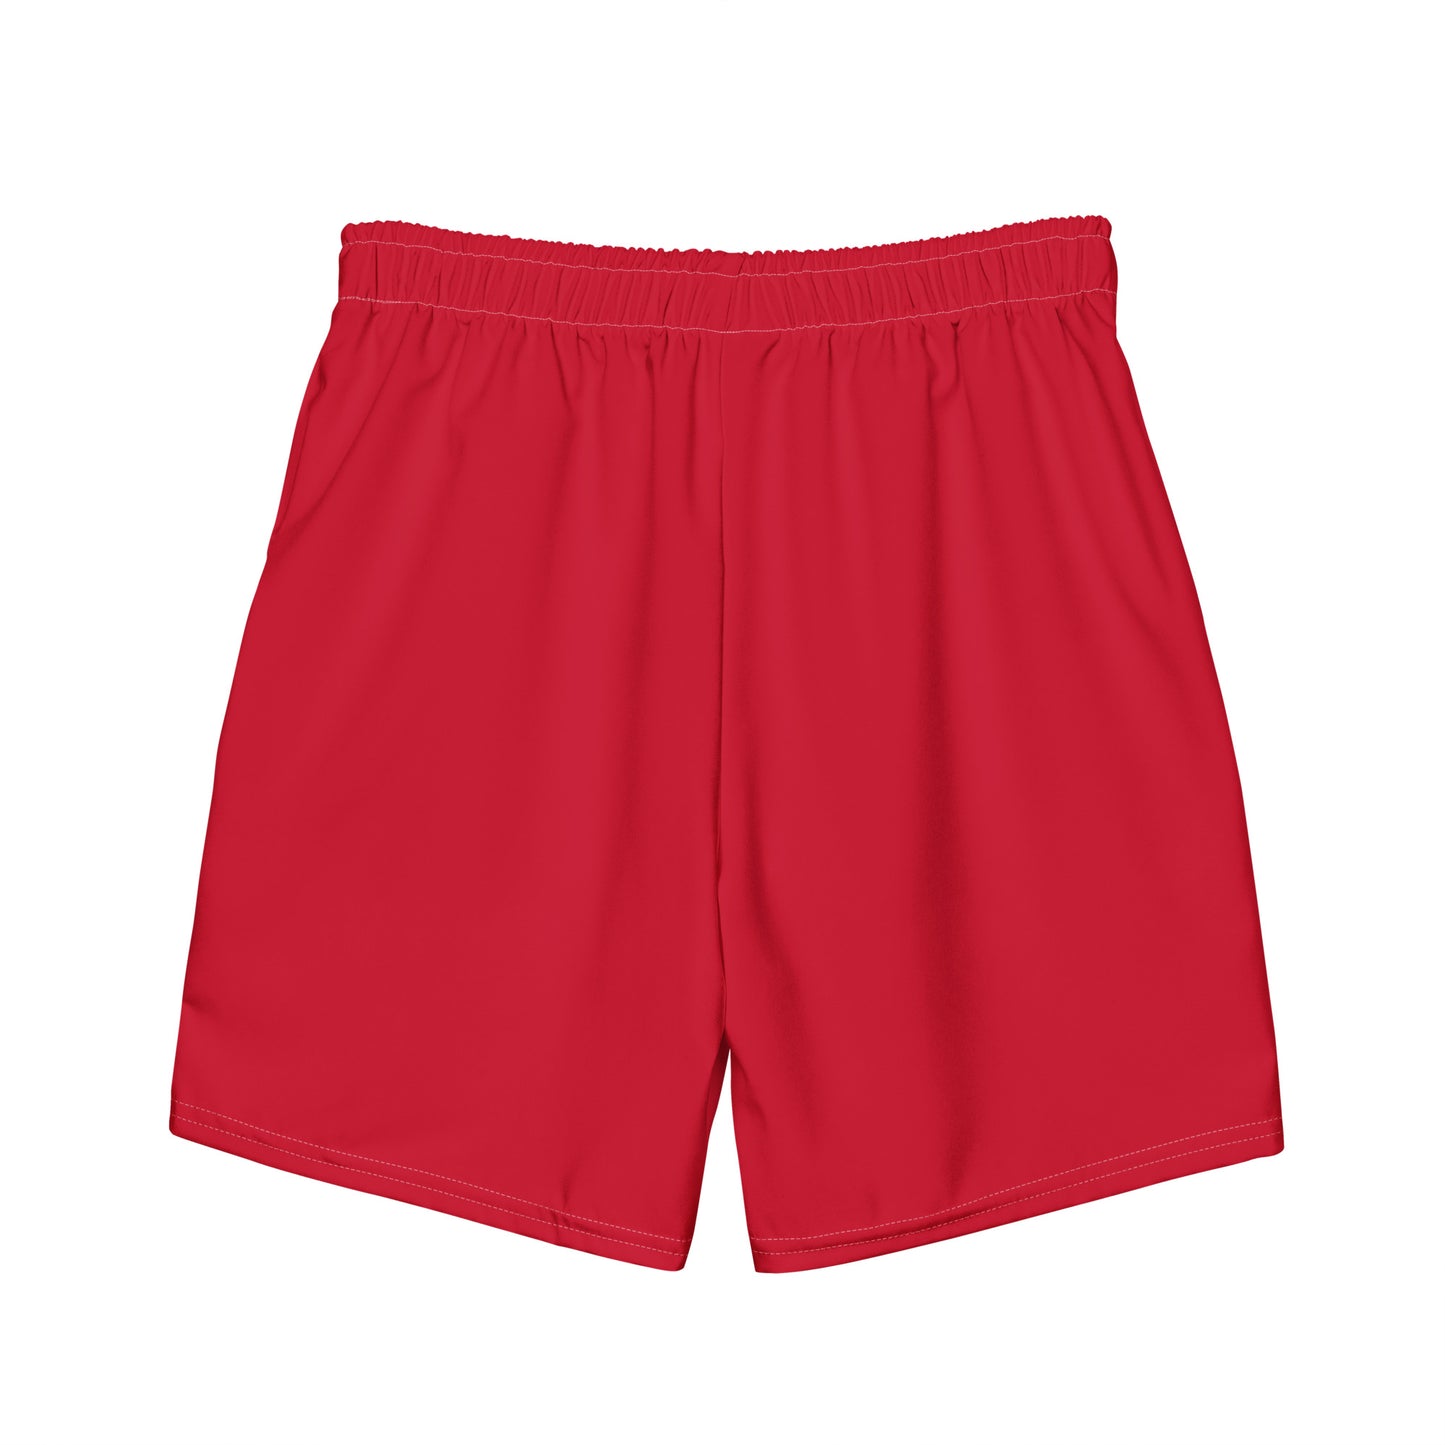 All-Over Print Recycled Swim Shorts: Red